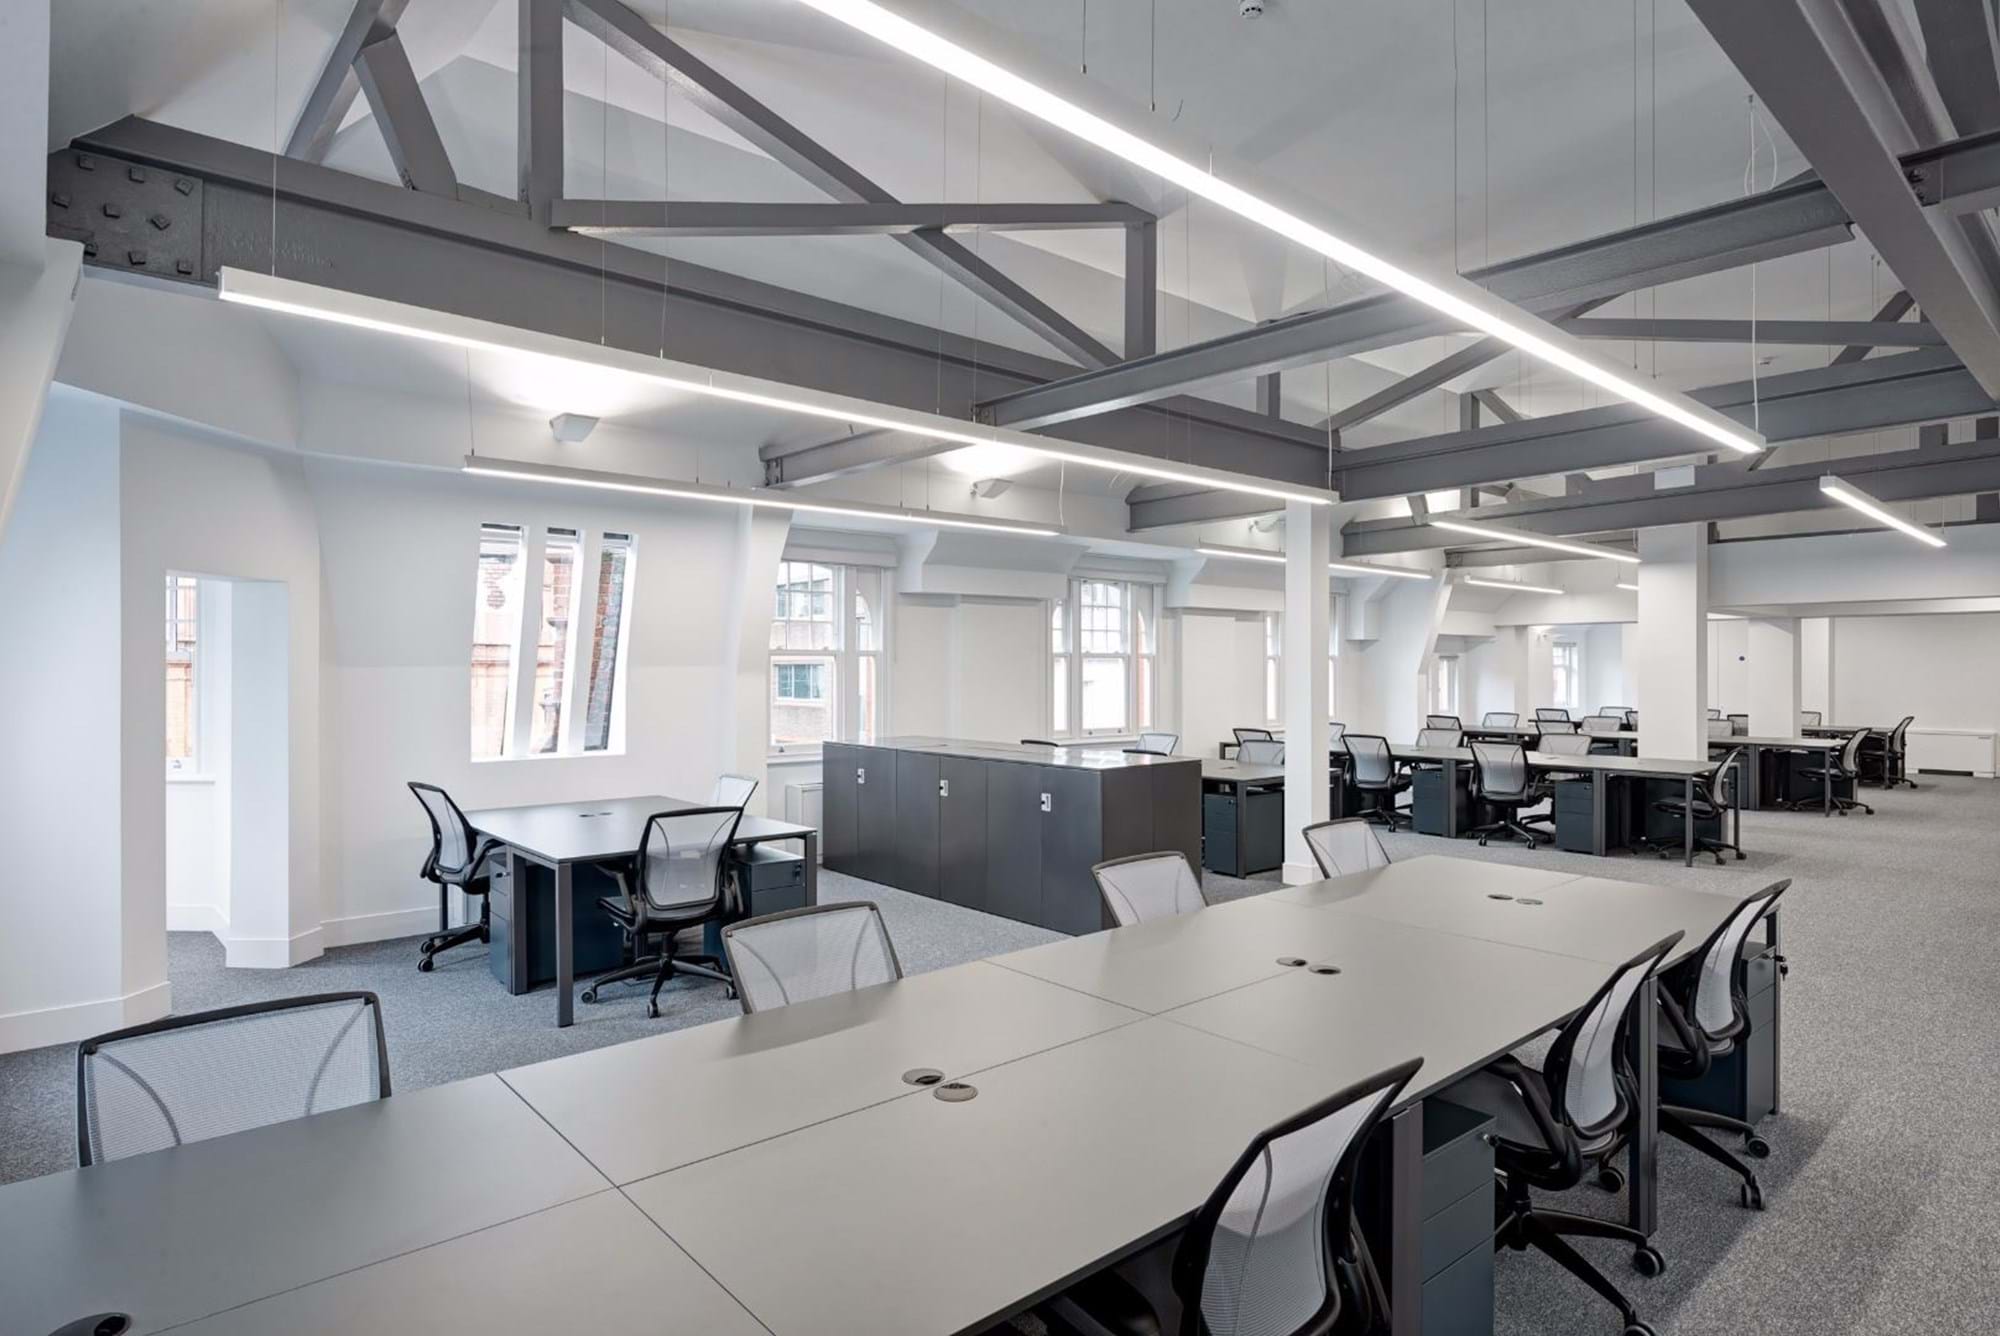 Modus Workspace office design, fit out and refurbishment - TOG - Wimpole Street - TOG Wimpole St 24 highres sRGB.jpg